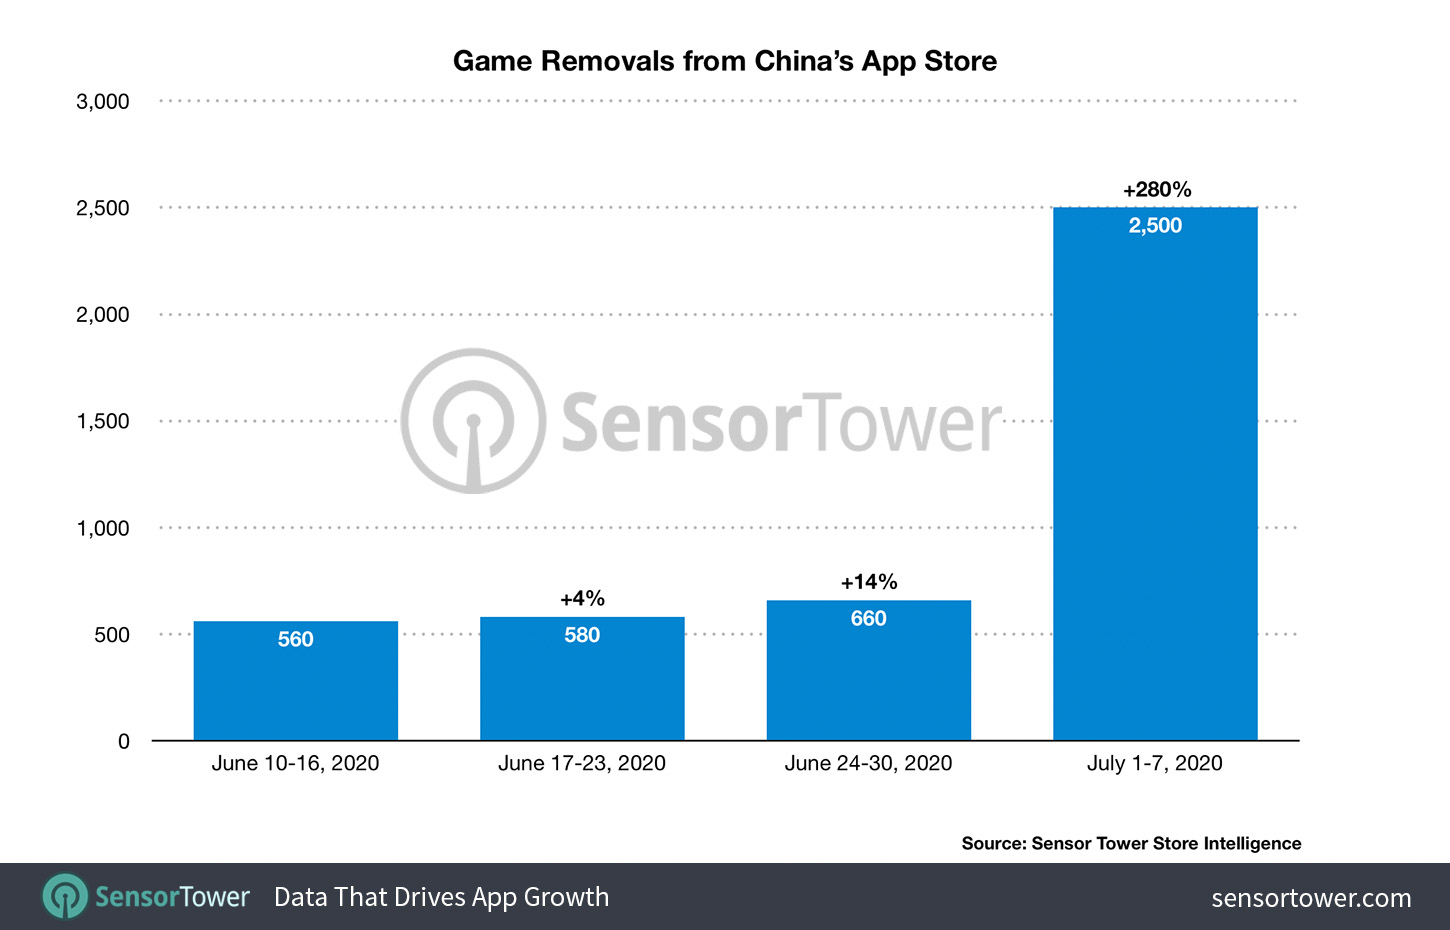 China App Store Game Removals by Week